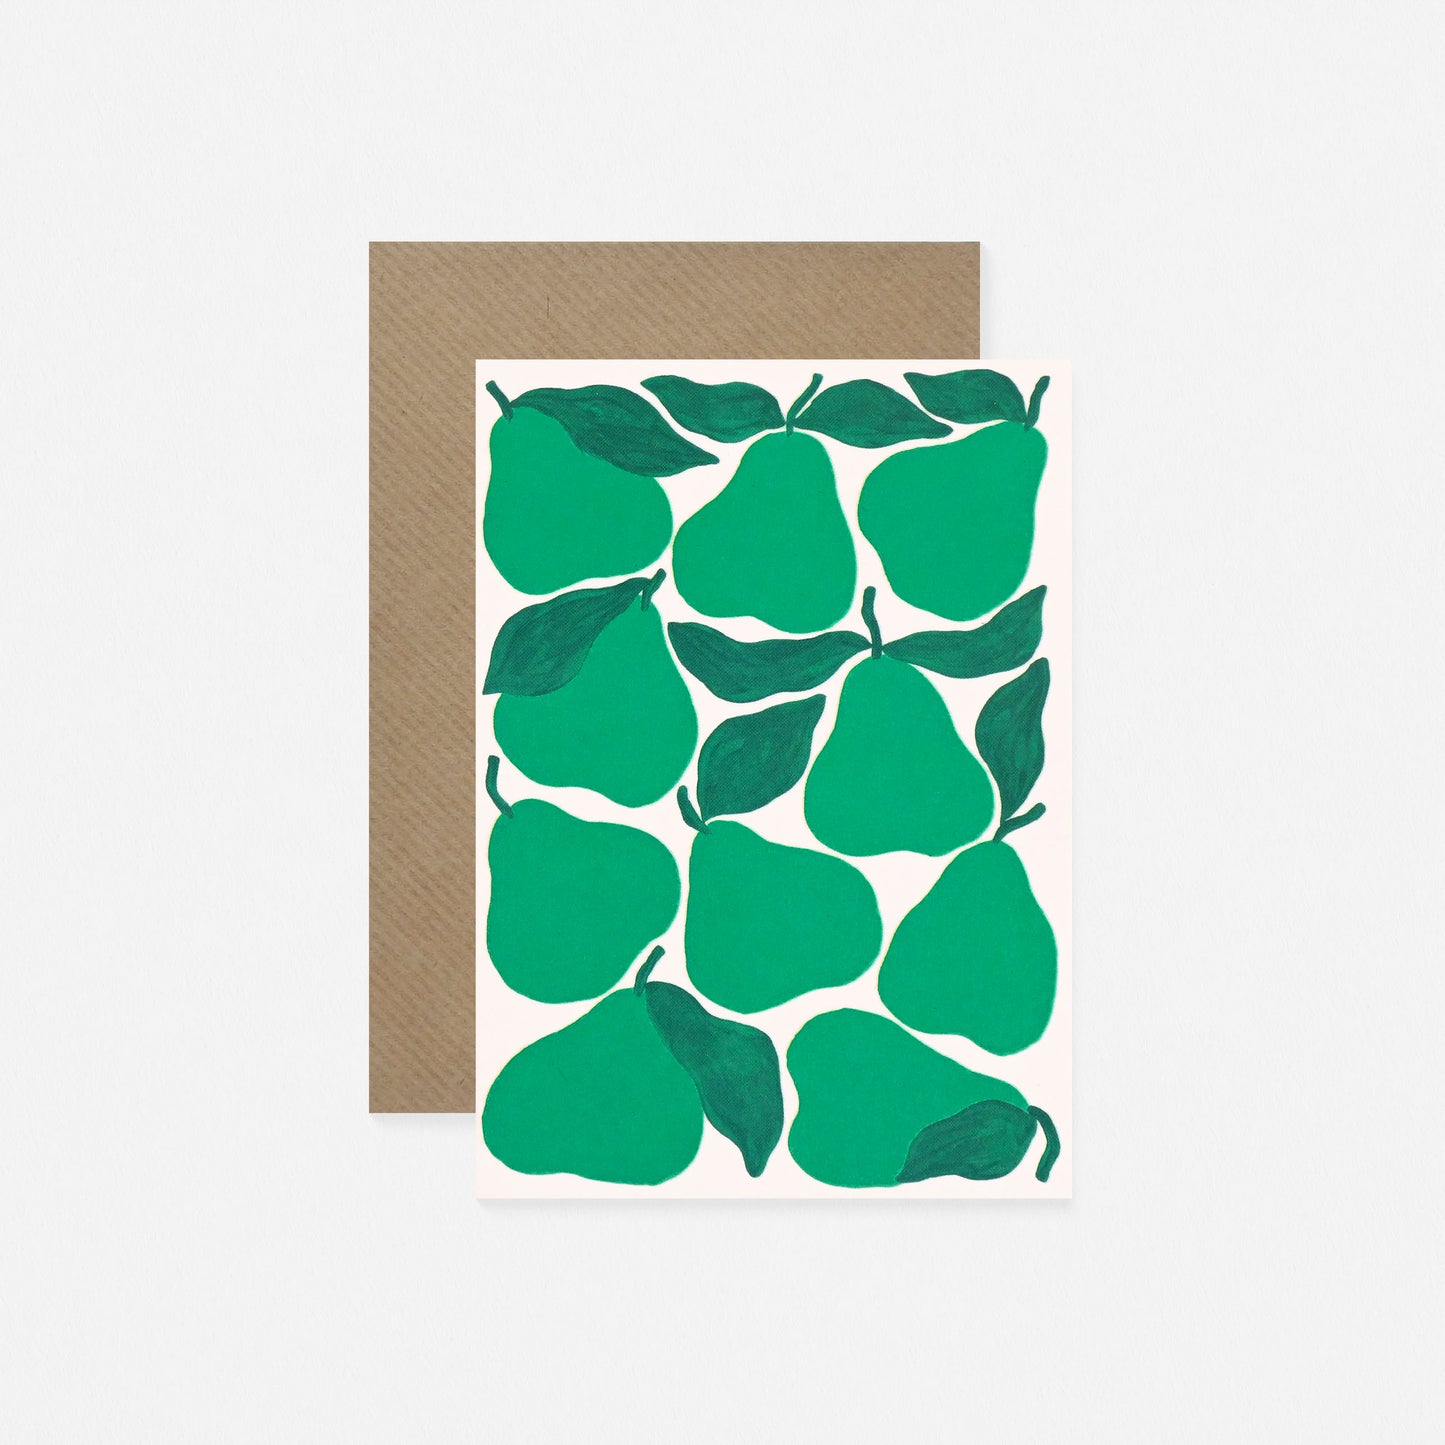 Evermade Green Pears Greeting Card 